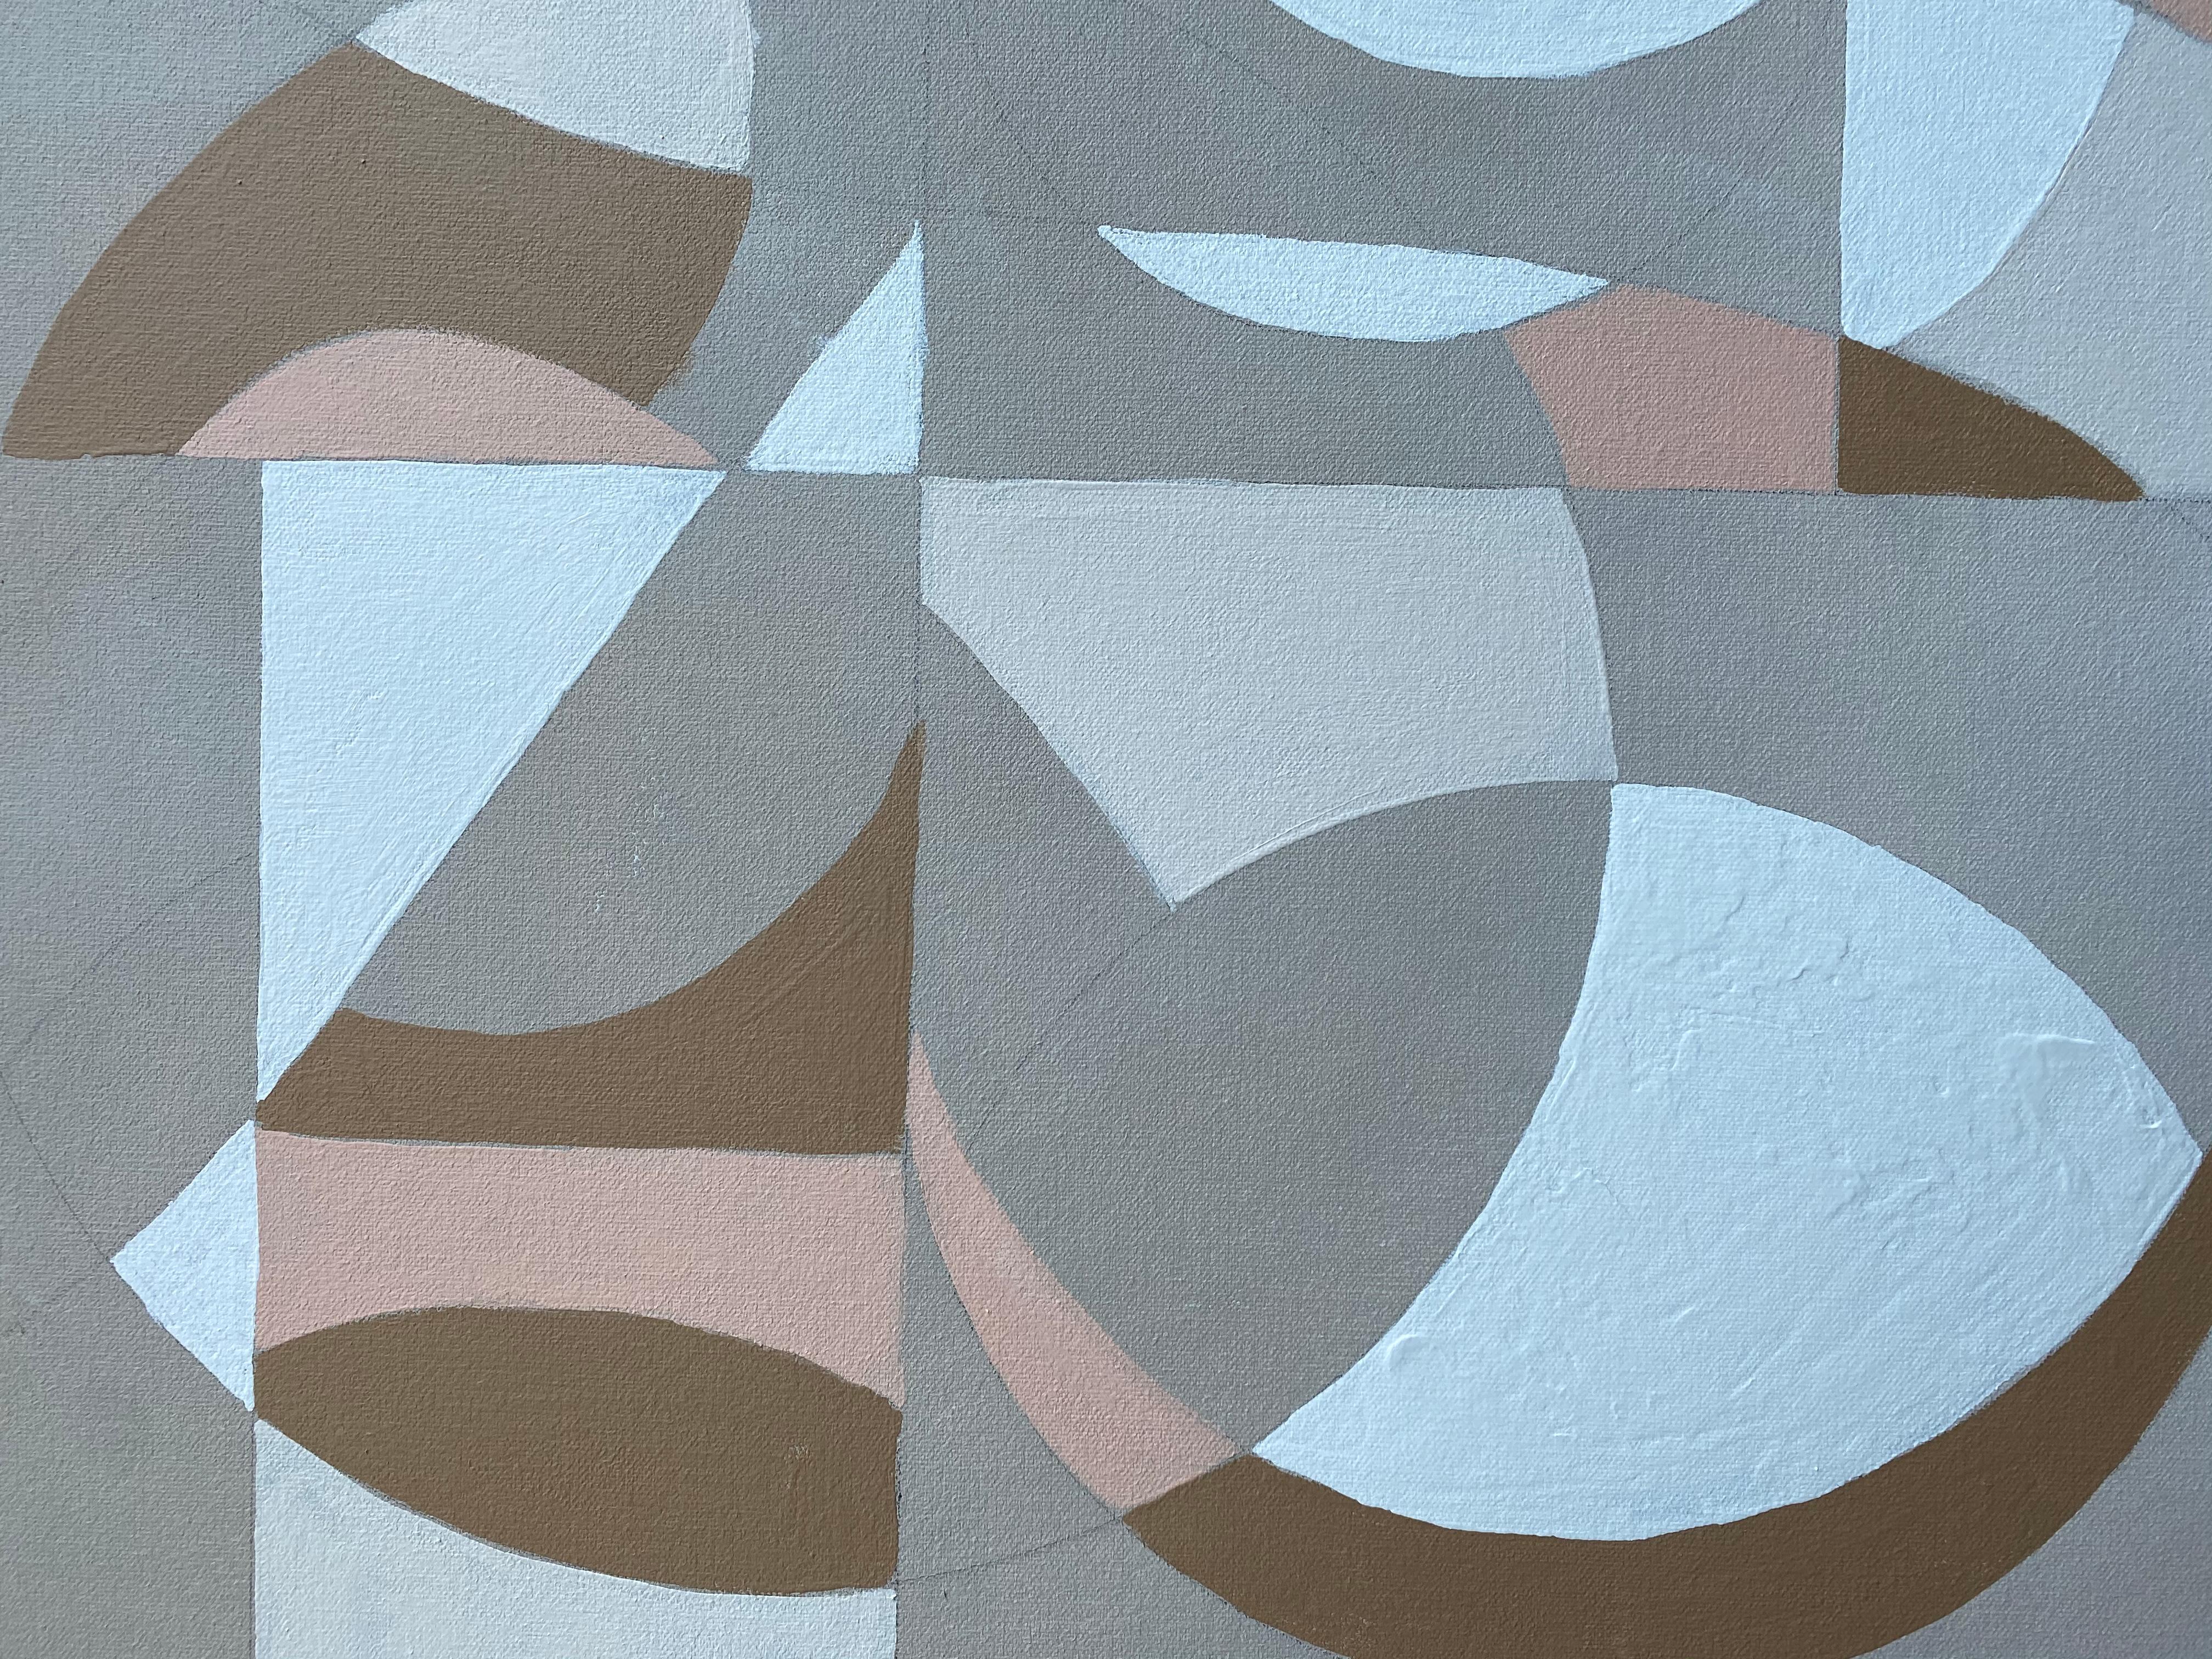 <p>Artist Comments<br />In this modern abstraction, artist Alicia Dunn interweaves subdued colors of white, beige, pink, and tan. By establishing interlacing blocks of neutral color, a grid-like pattern emerges among the flowing circles and curved